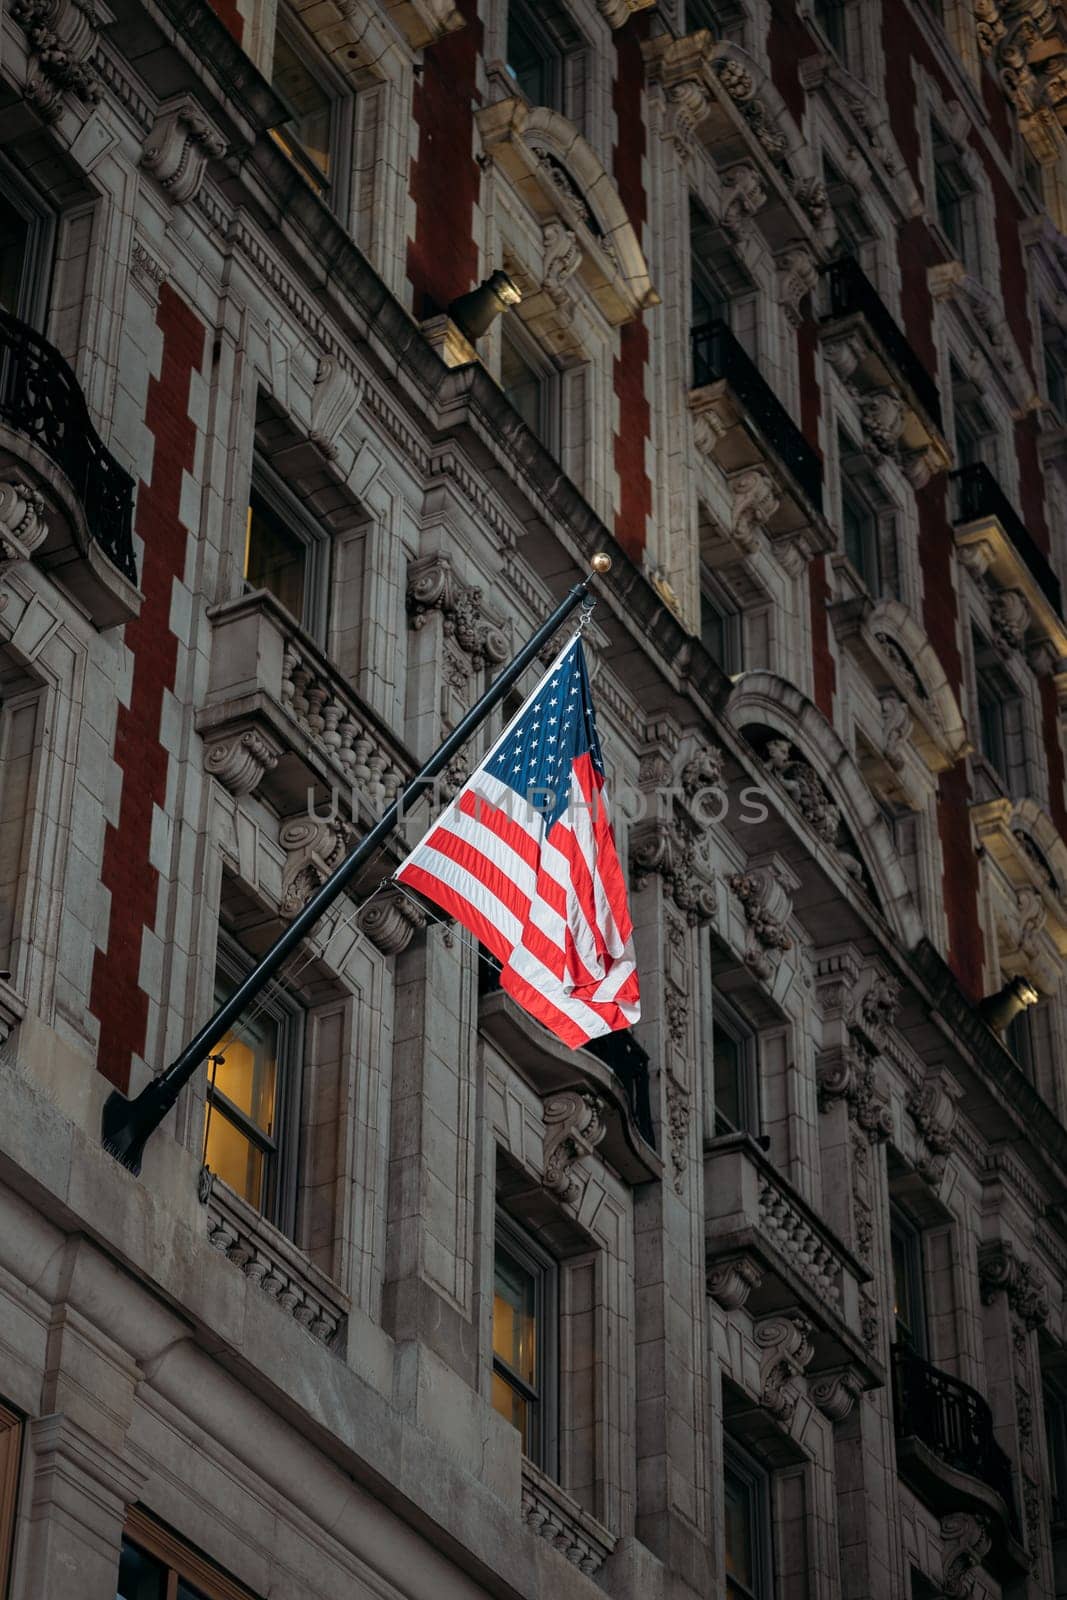 Proud American Flag Hanging from Traditional New York Architecture by apavlin